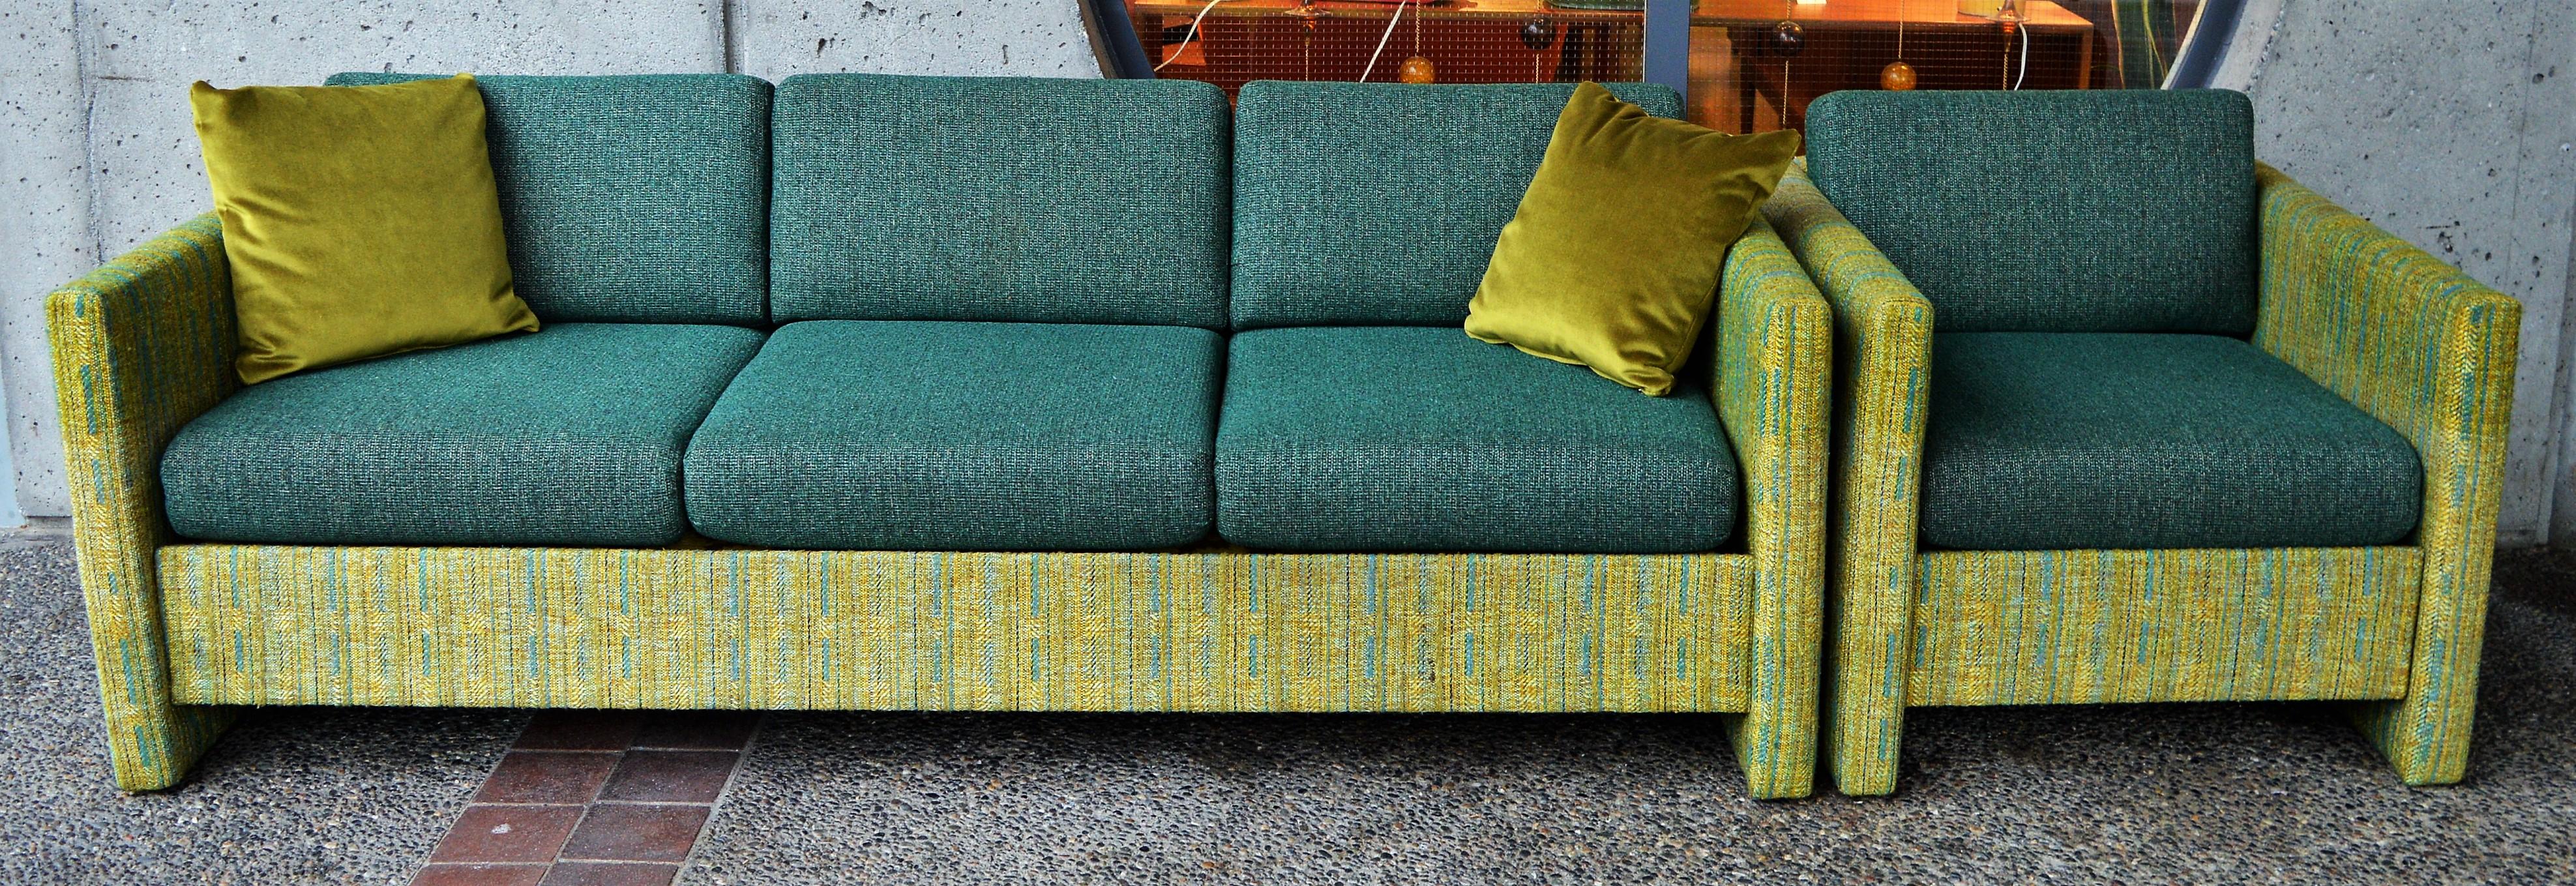 Mid-20th Century Midcentury Sofa and Club Chair in Teal Wool Cushions with Contrasting Print